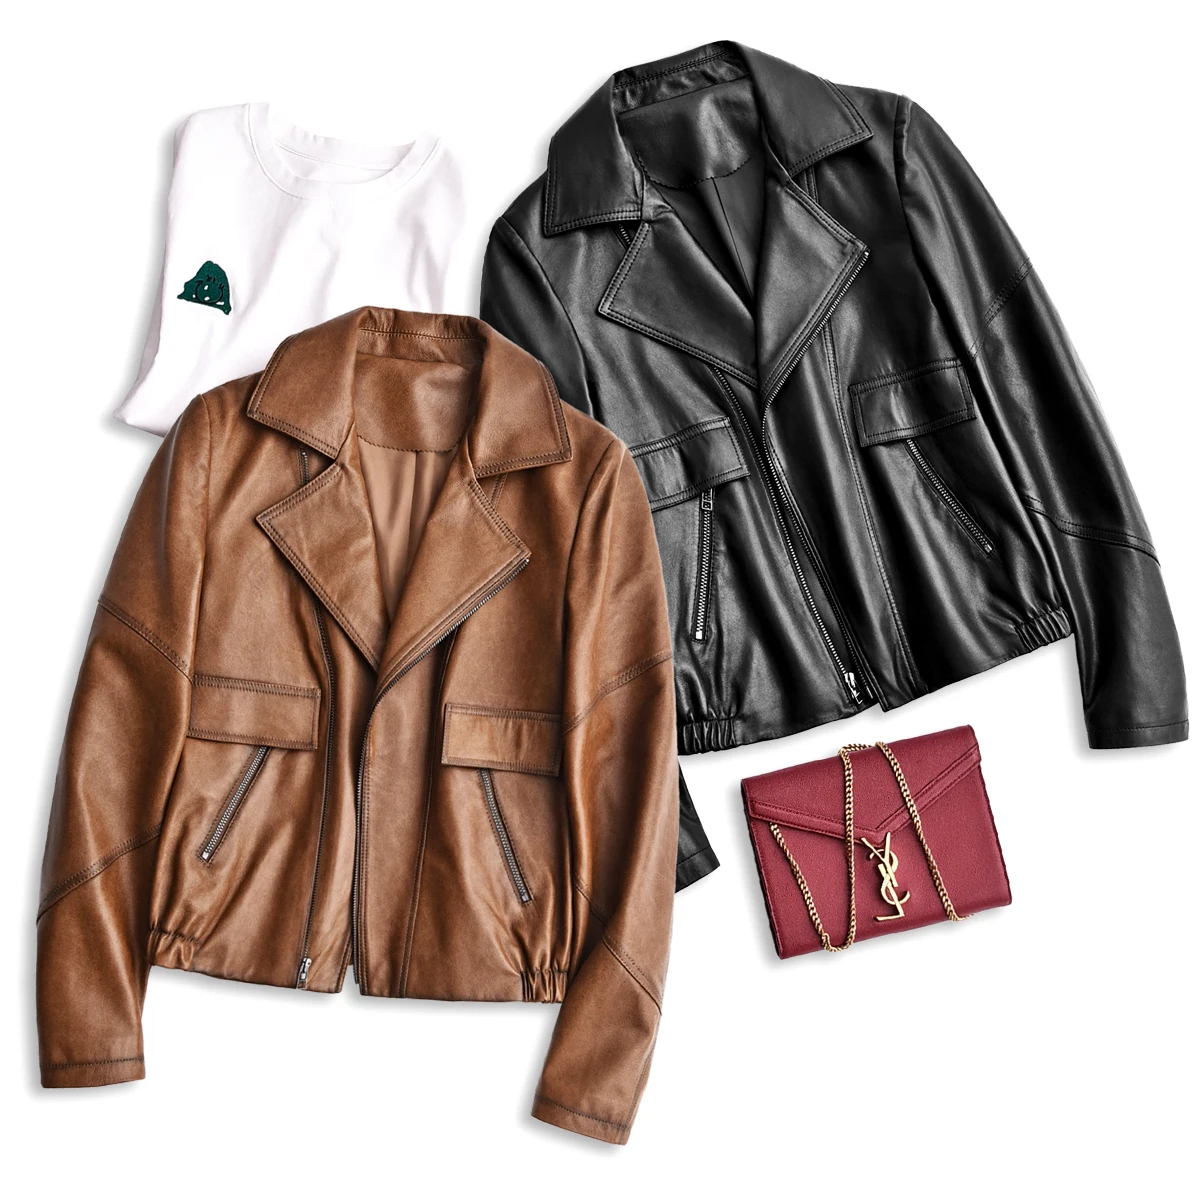 Texture Plant Blended Sheepskin Small Short Genuine Leather Motorcycle Leather Coat for Women  autumn fashion new jacket